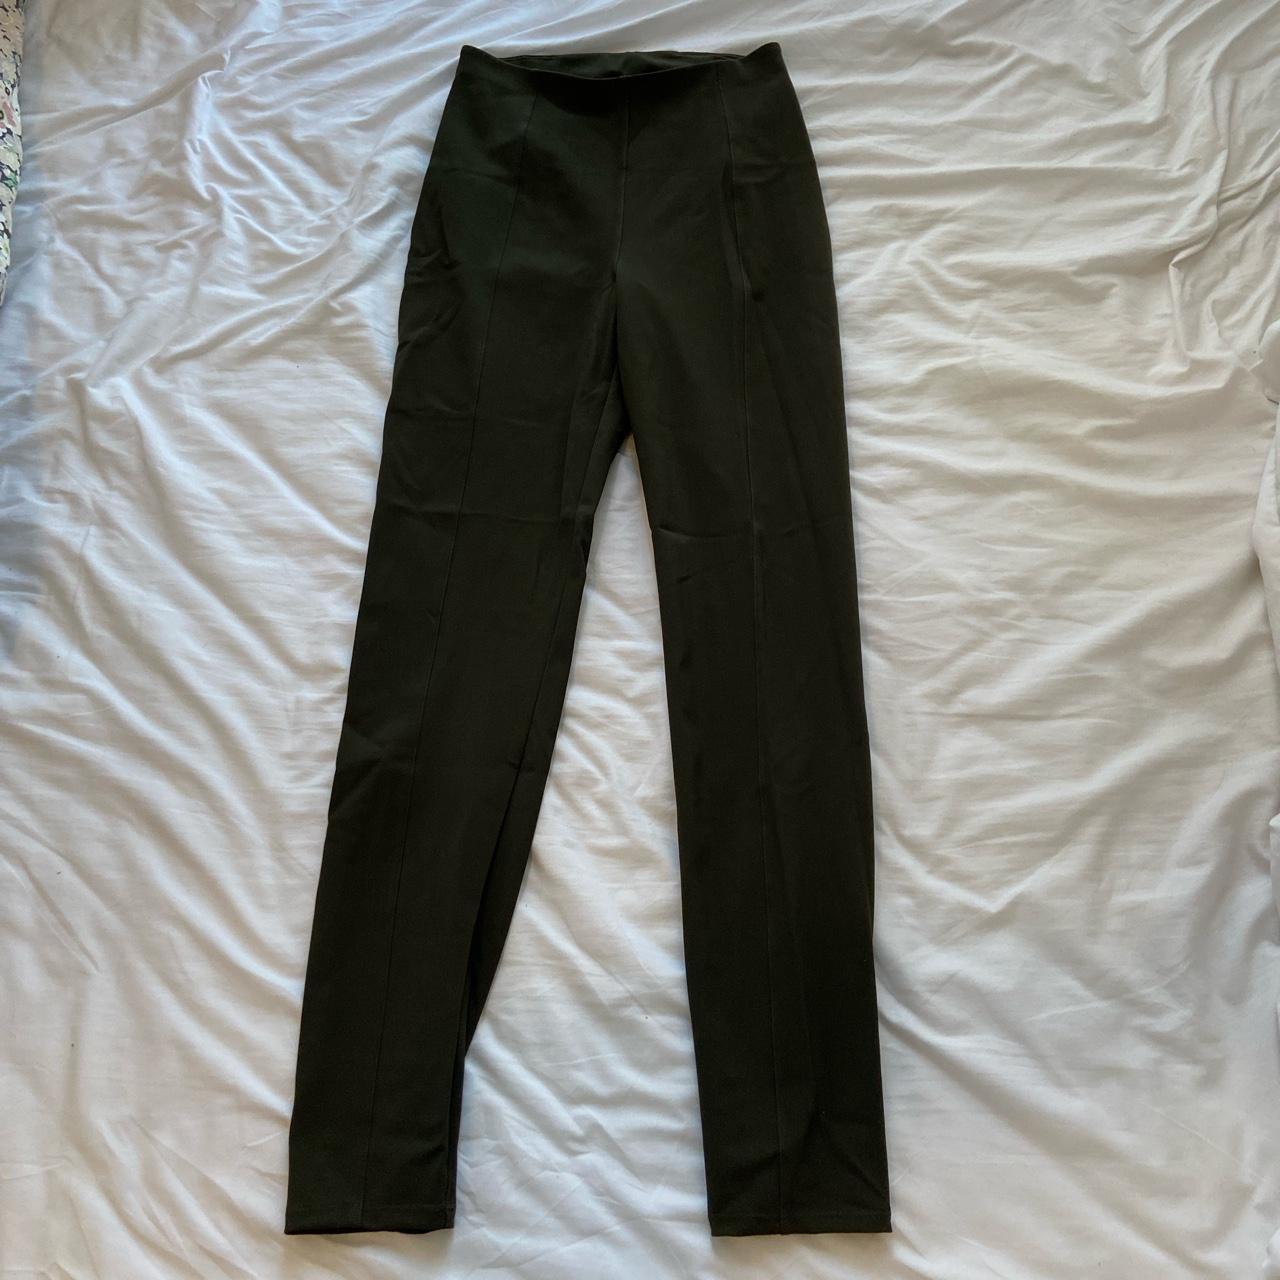 Lululemon Here to There High Rise 7/8 Pant in Dark - Depop